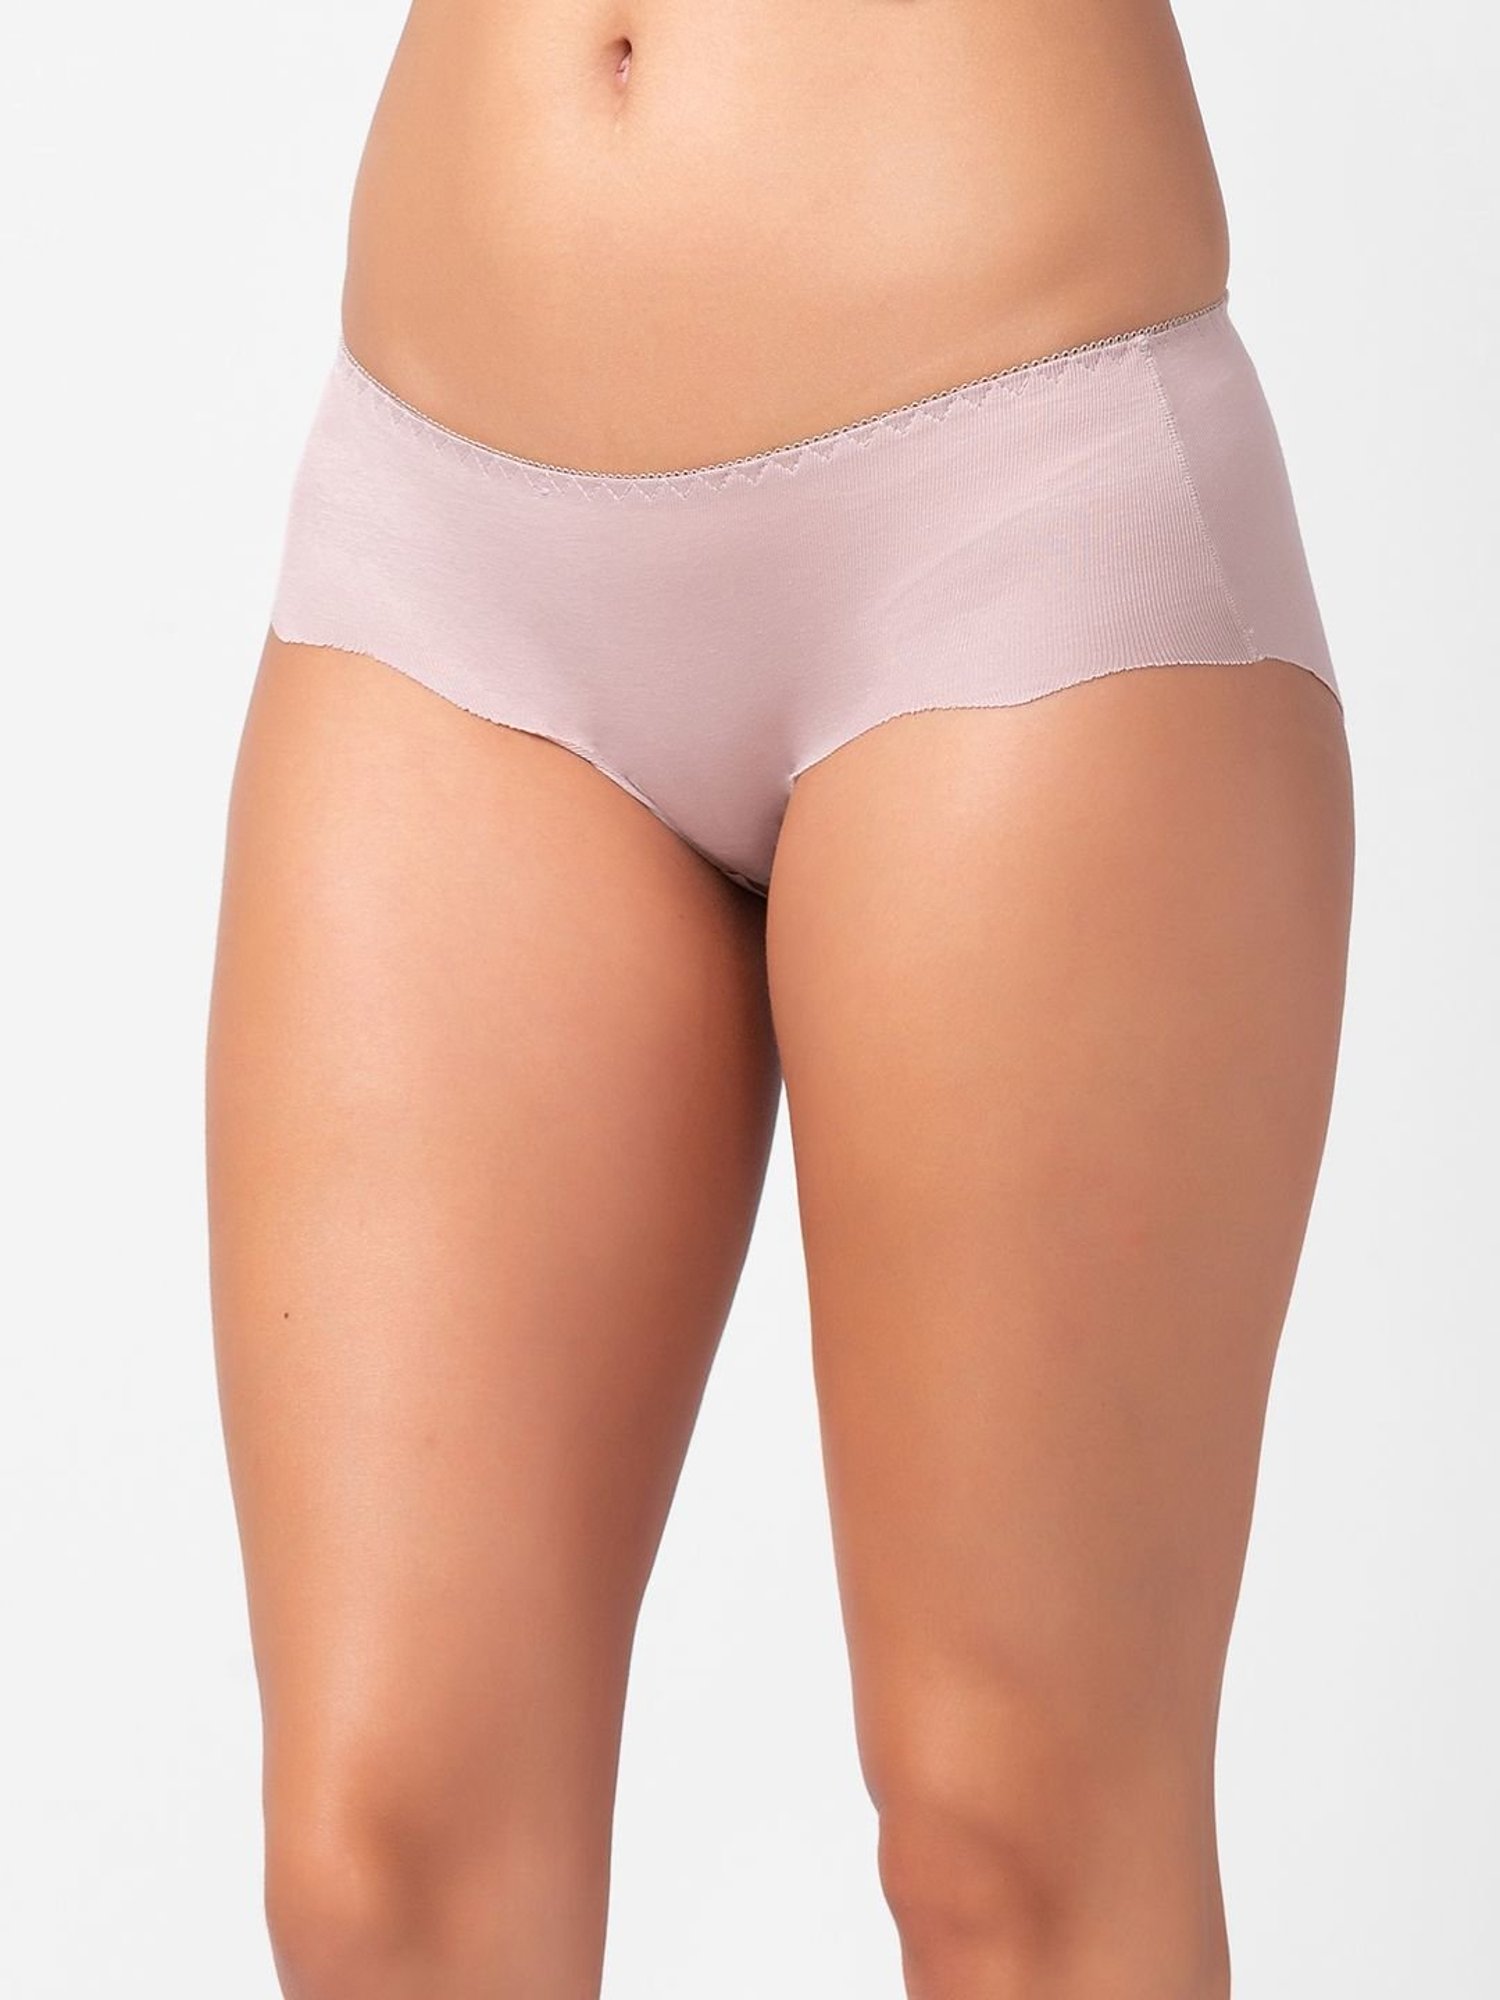 Plain Tesla Feel Dream Ladies Cotton Panty at Rs 235/box in Indore